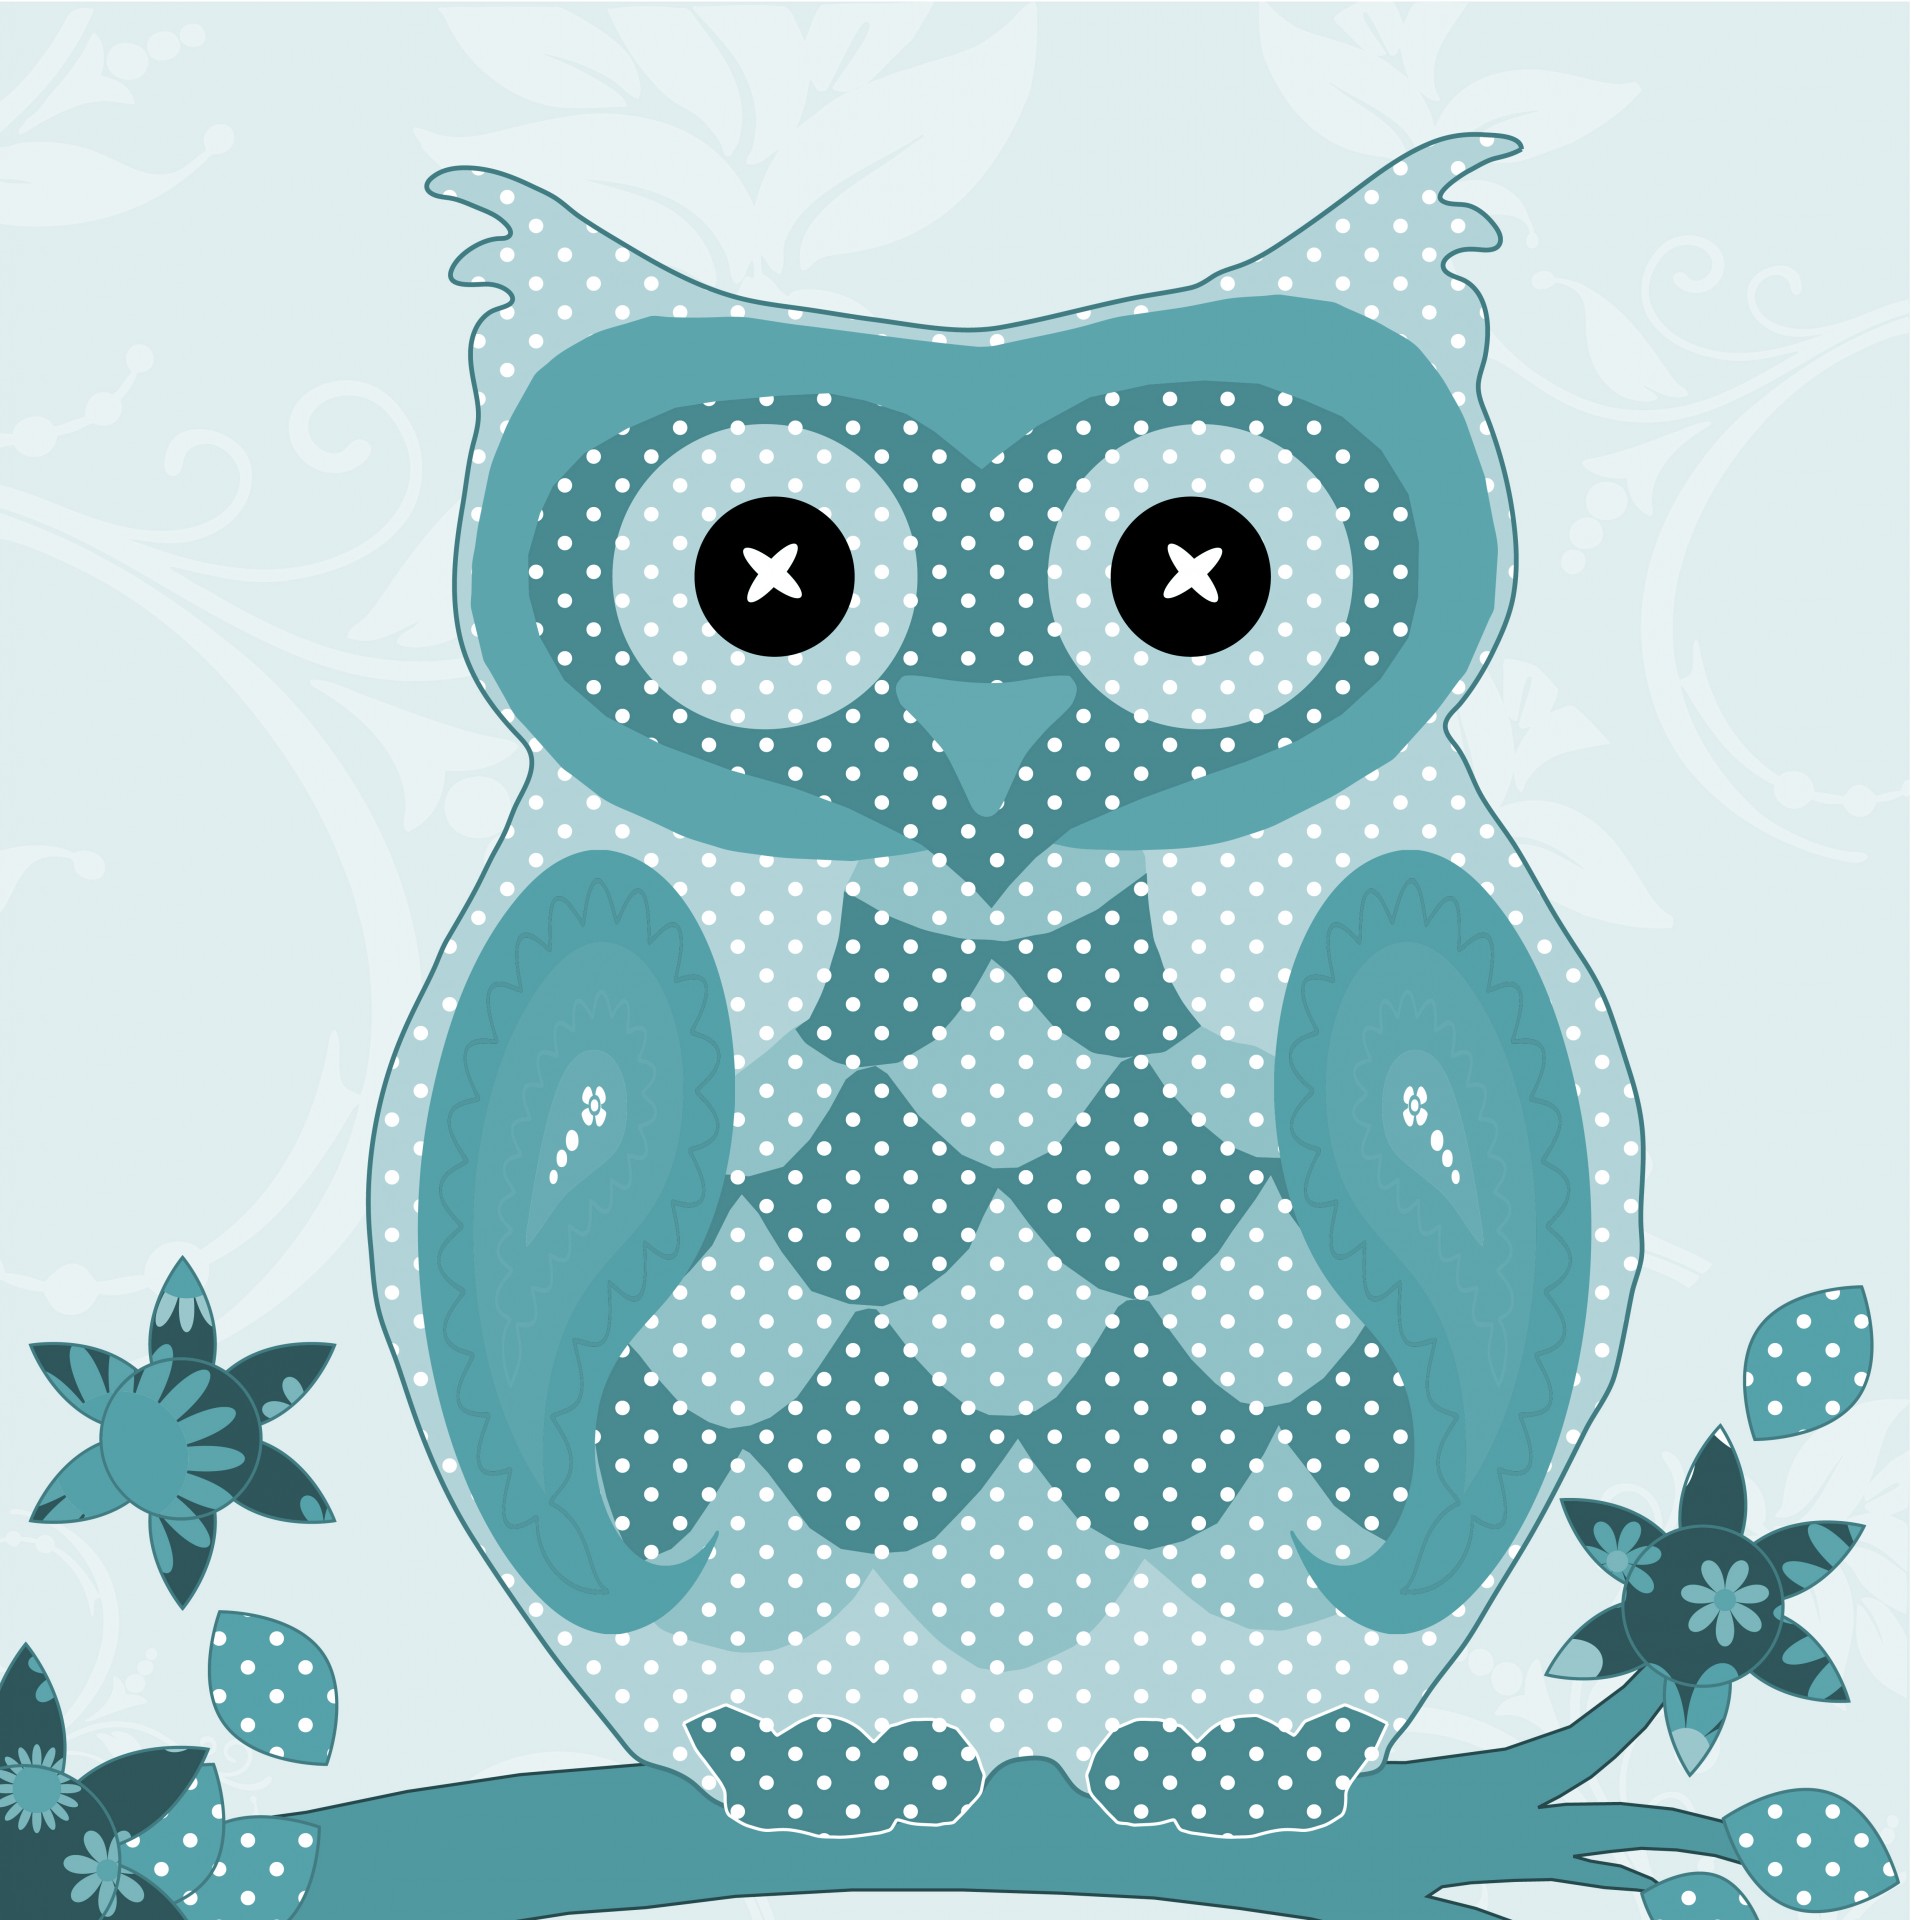 Owl Patterned Cute Teal Color